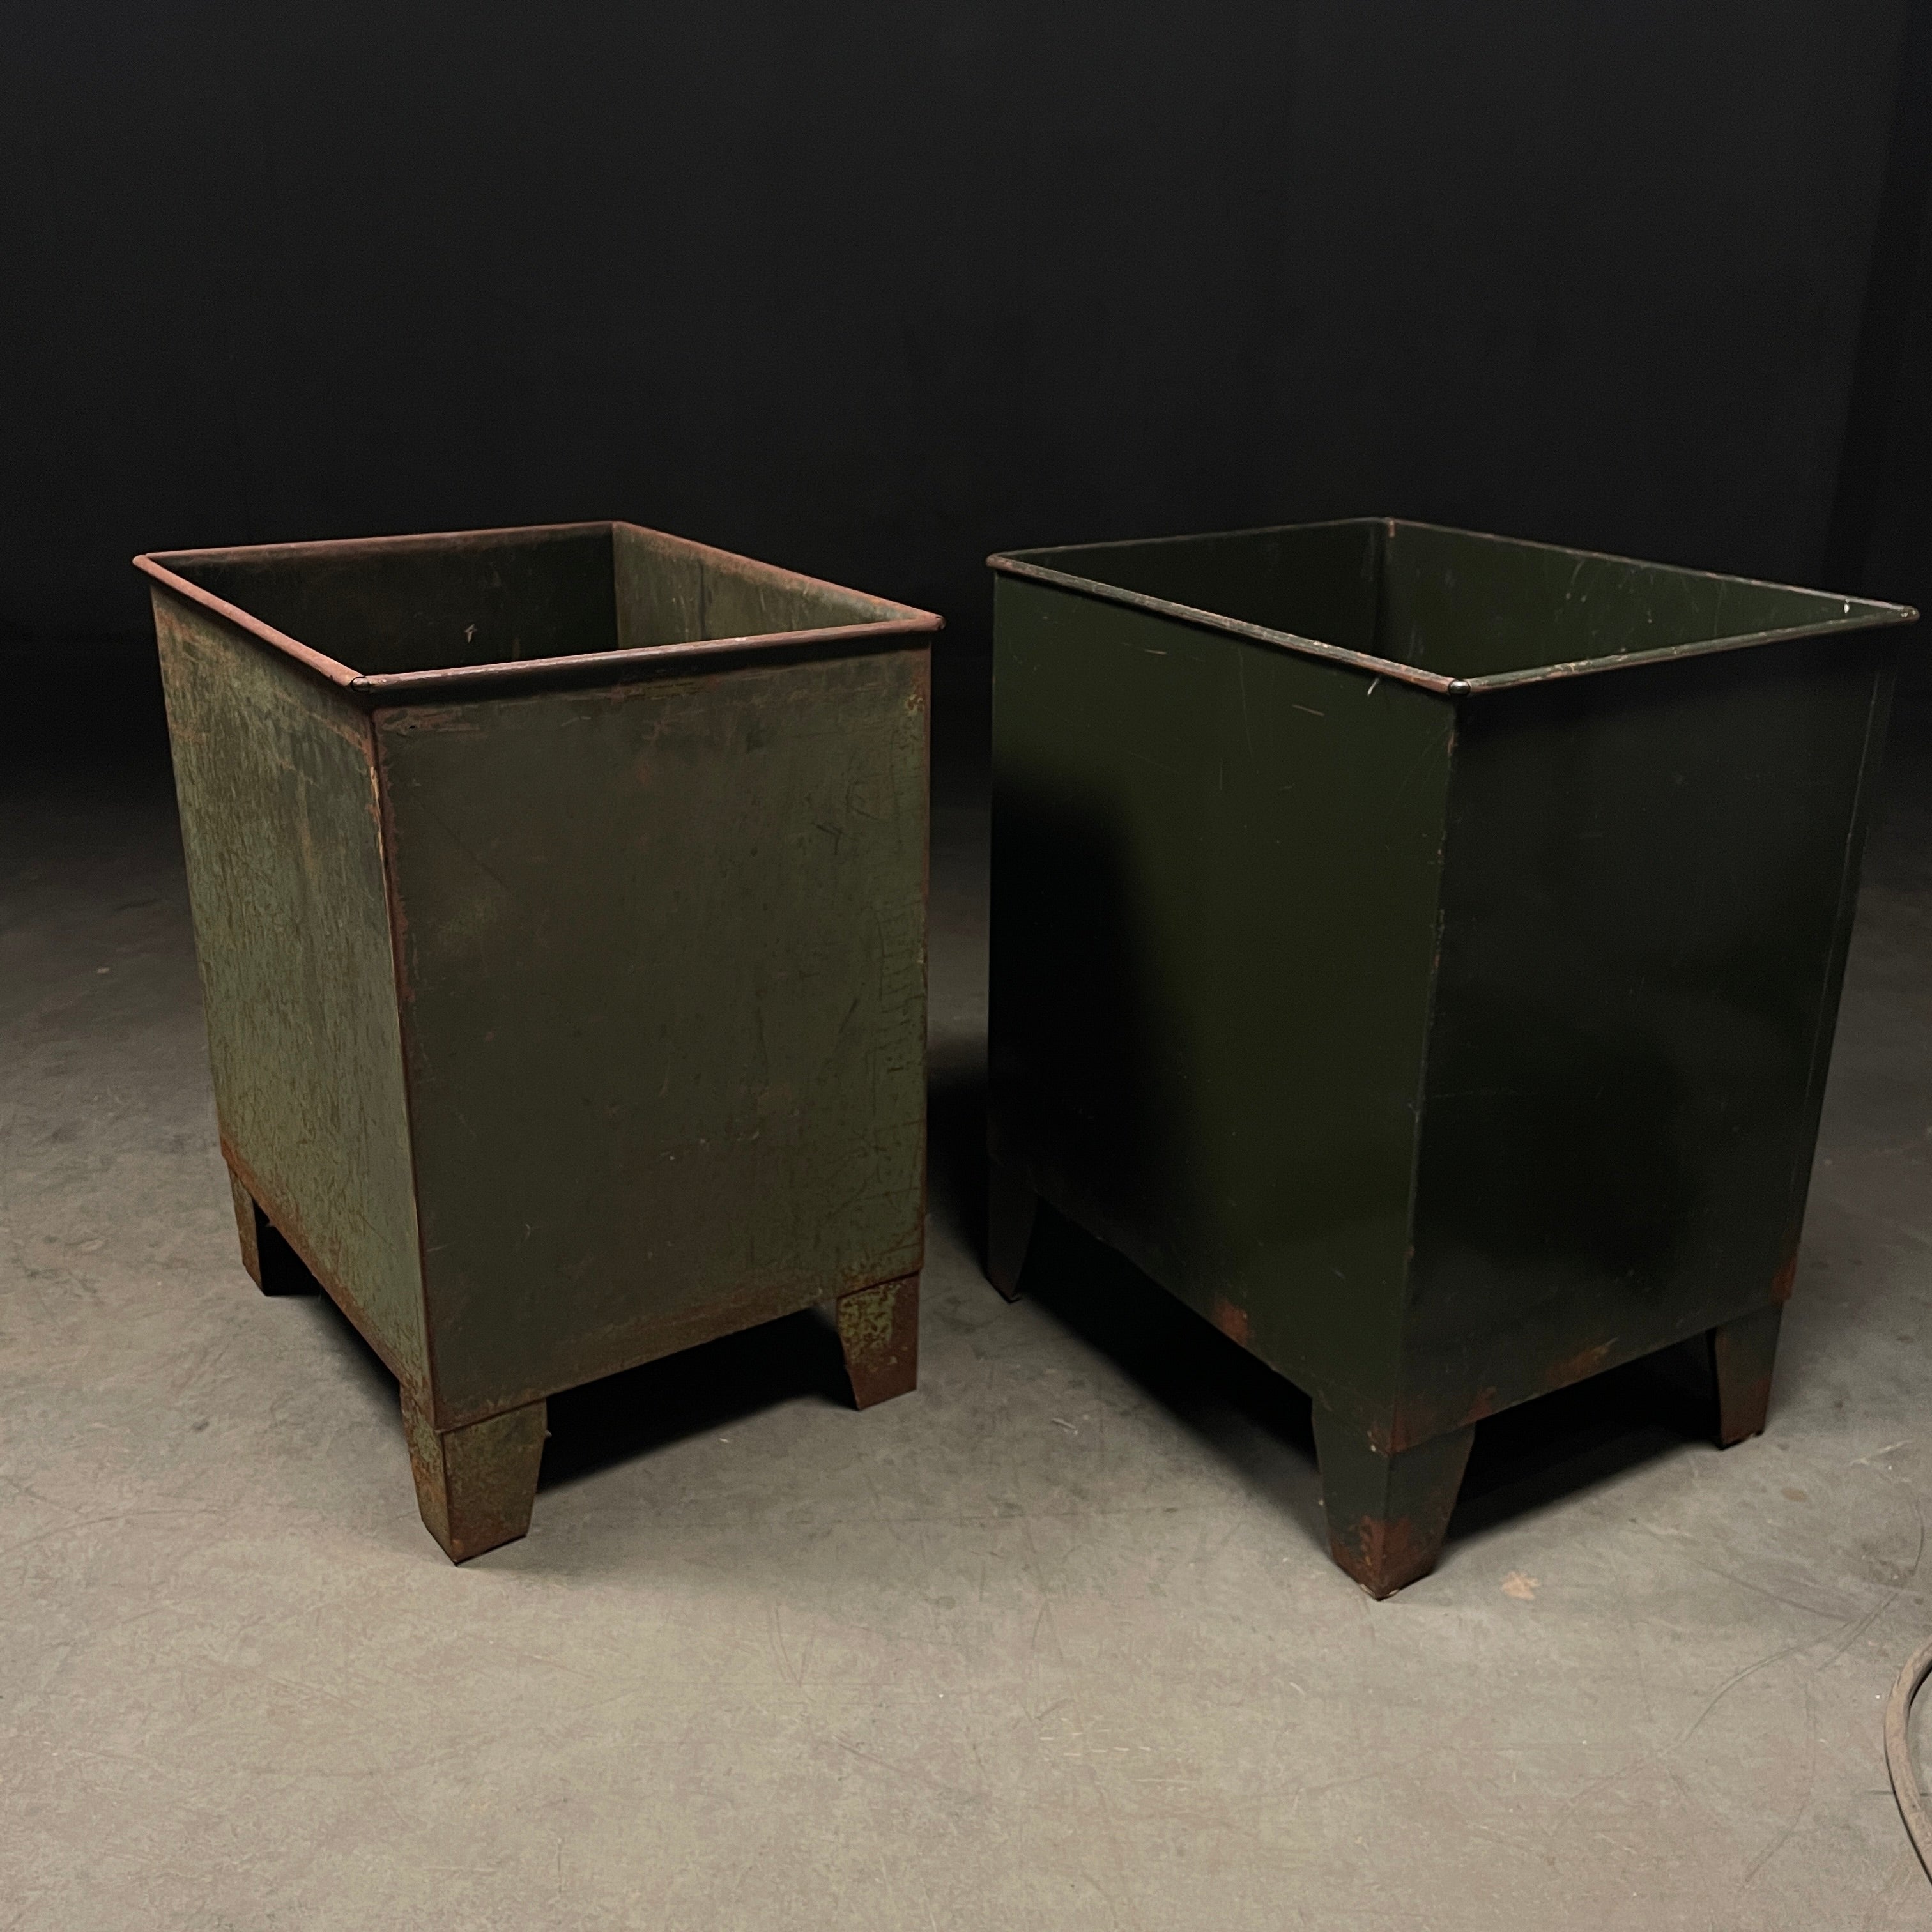 Pair of Large Planters with Original Green Paint